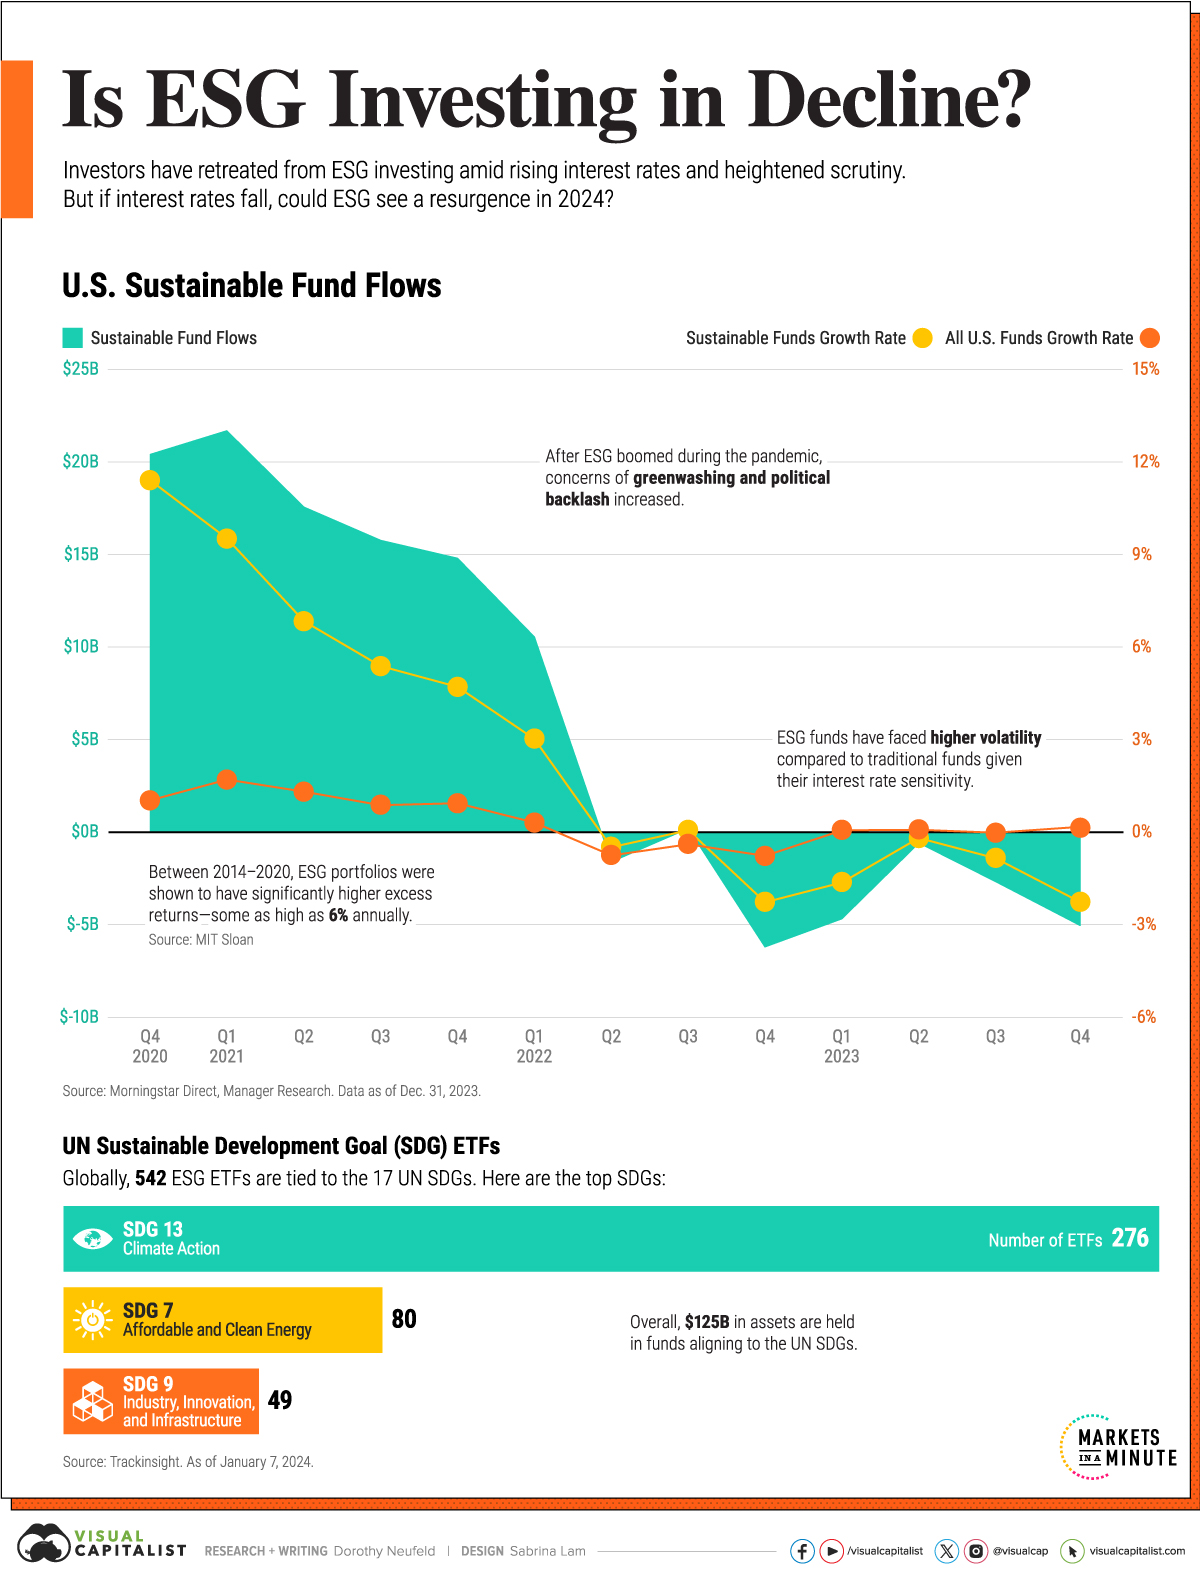 This area chart shows the decline of fund flows in ESG investments.